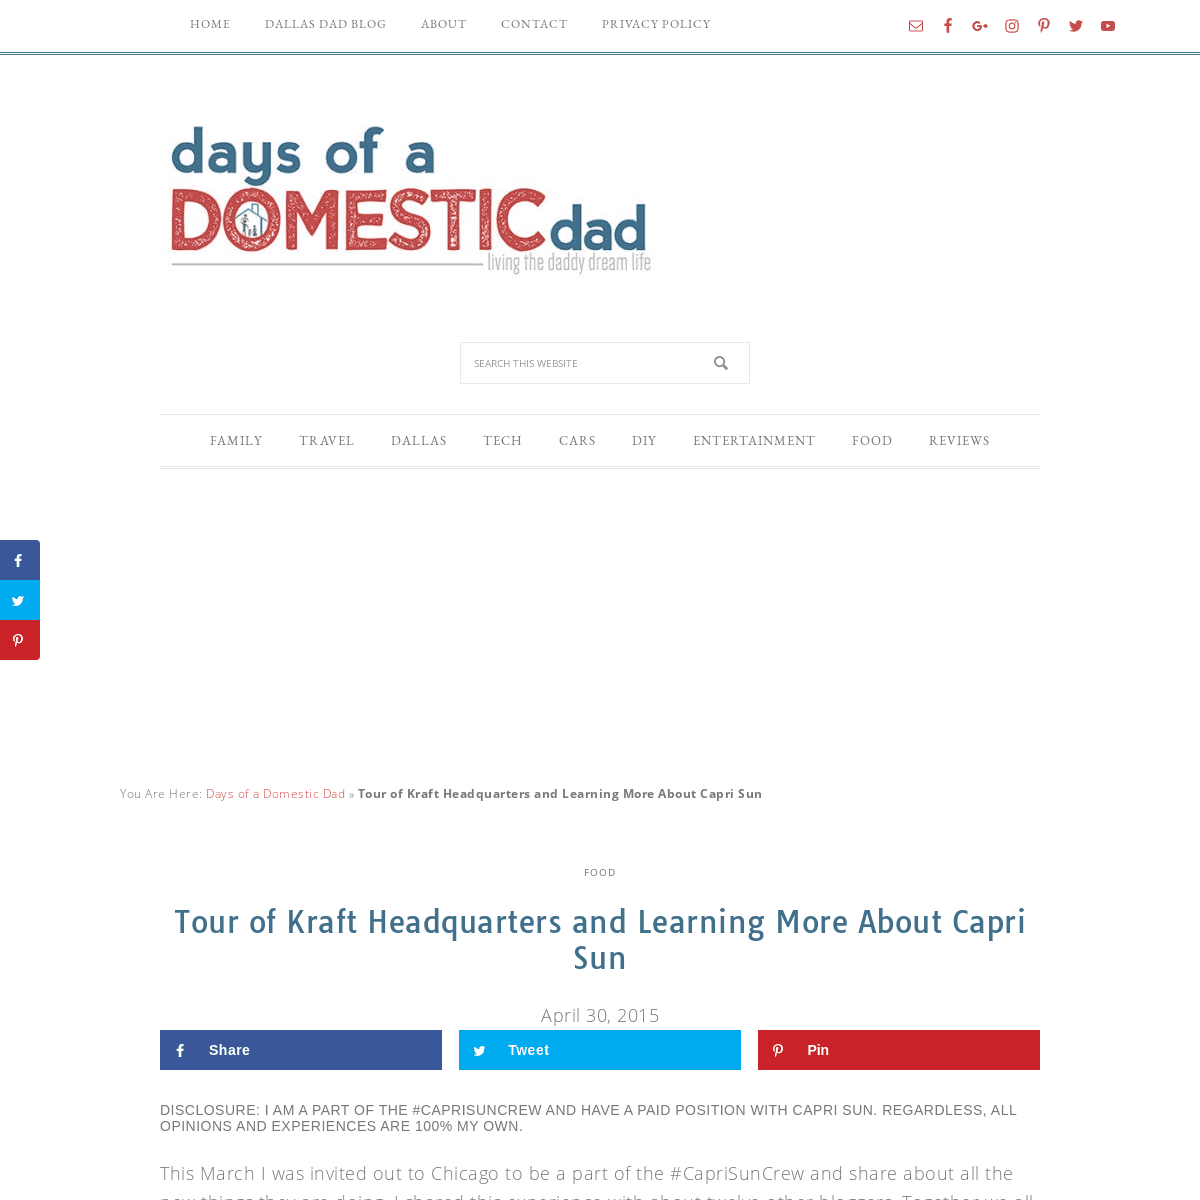 A complete backup of https://daysofadomesticdad.com/tour-of-kraft-headquarters-and-learning-more-about-capri-sun/